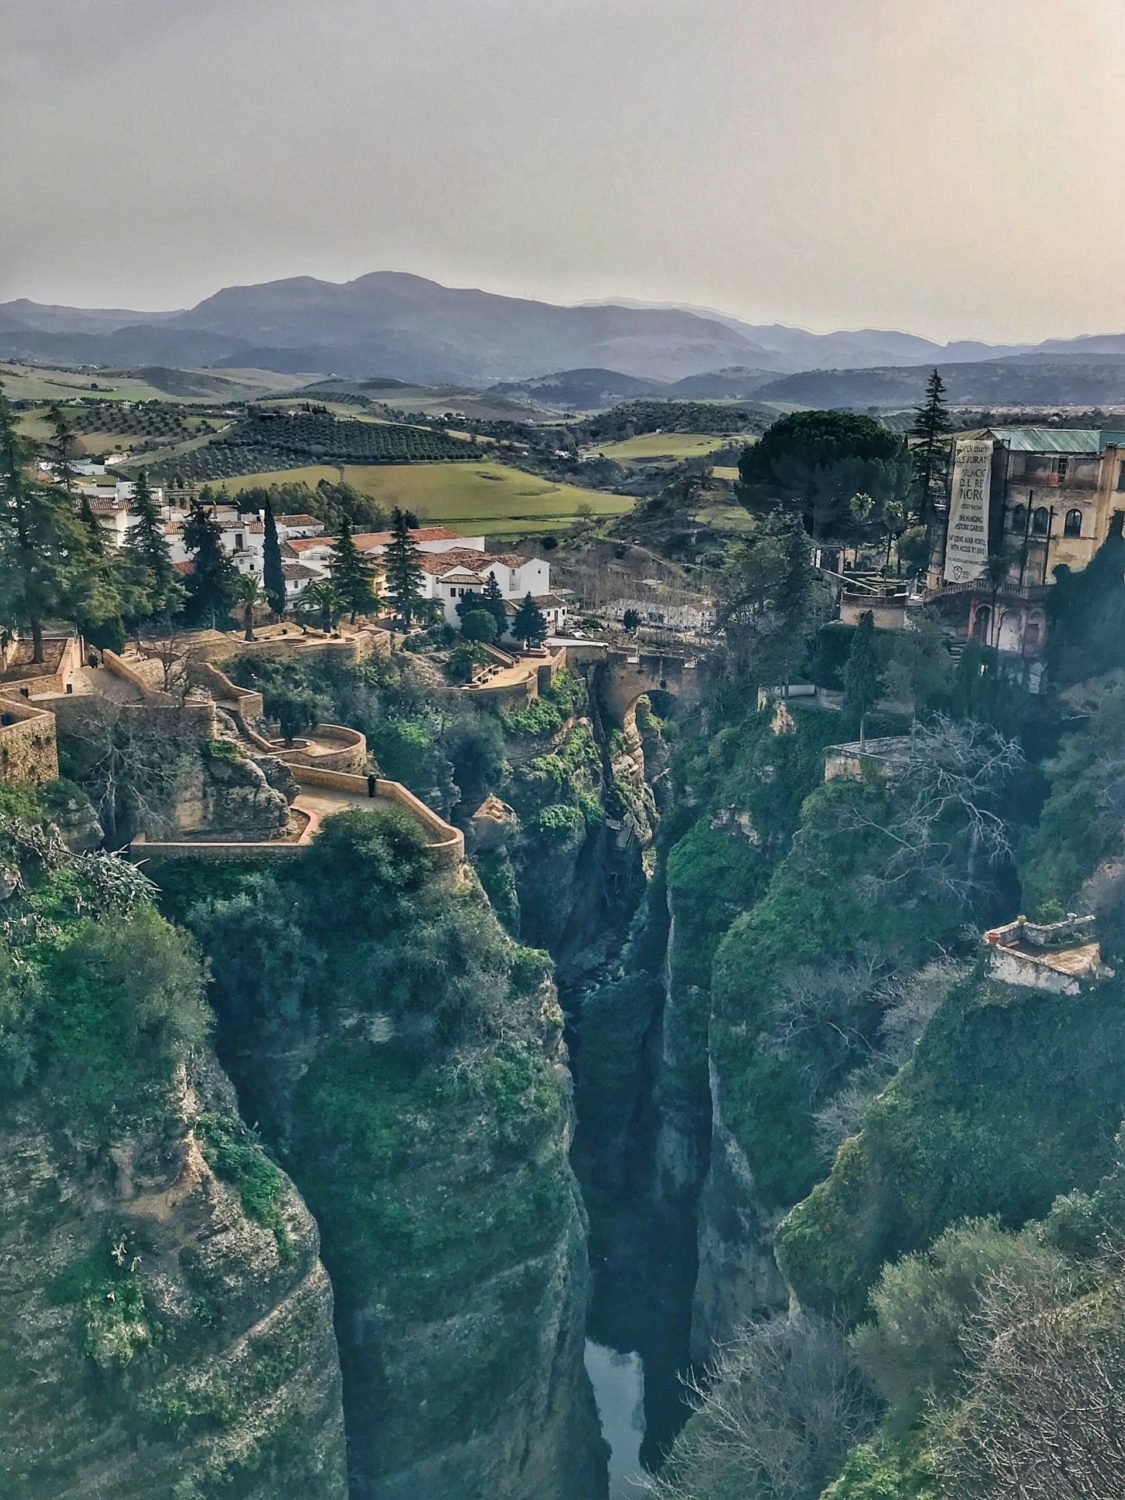 One day in Ronda, Spain: what to do